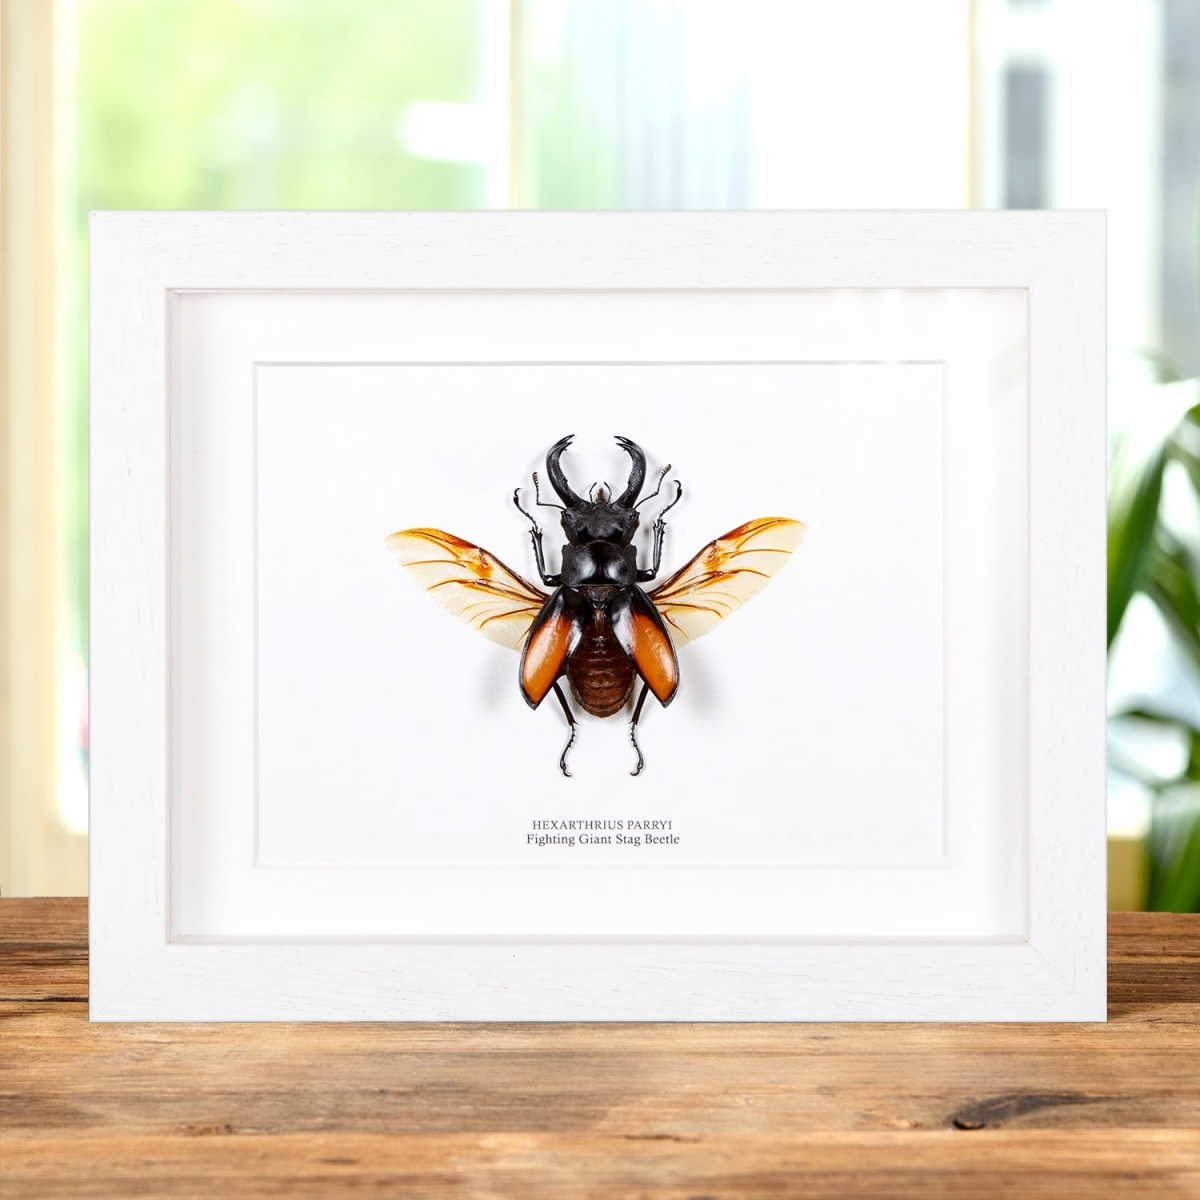 Fighting Giant Stag Beetle in Box Frame (Hexarthrius parryi)